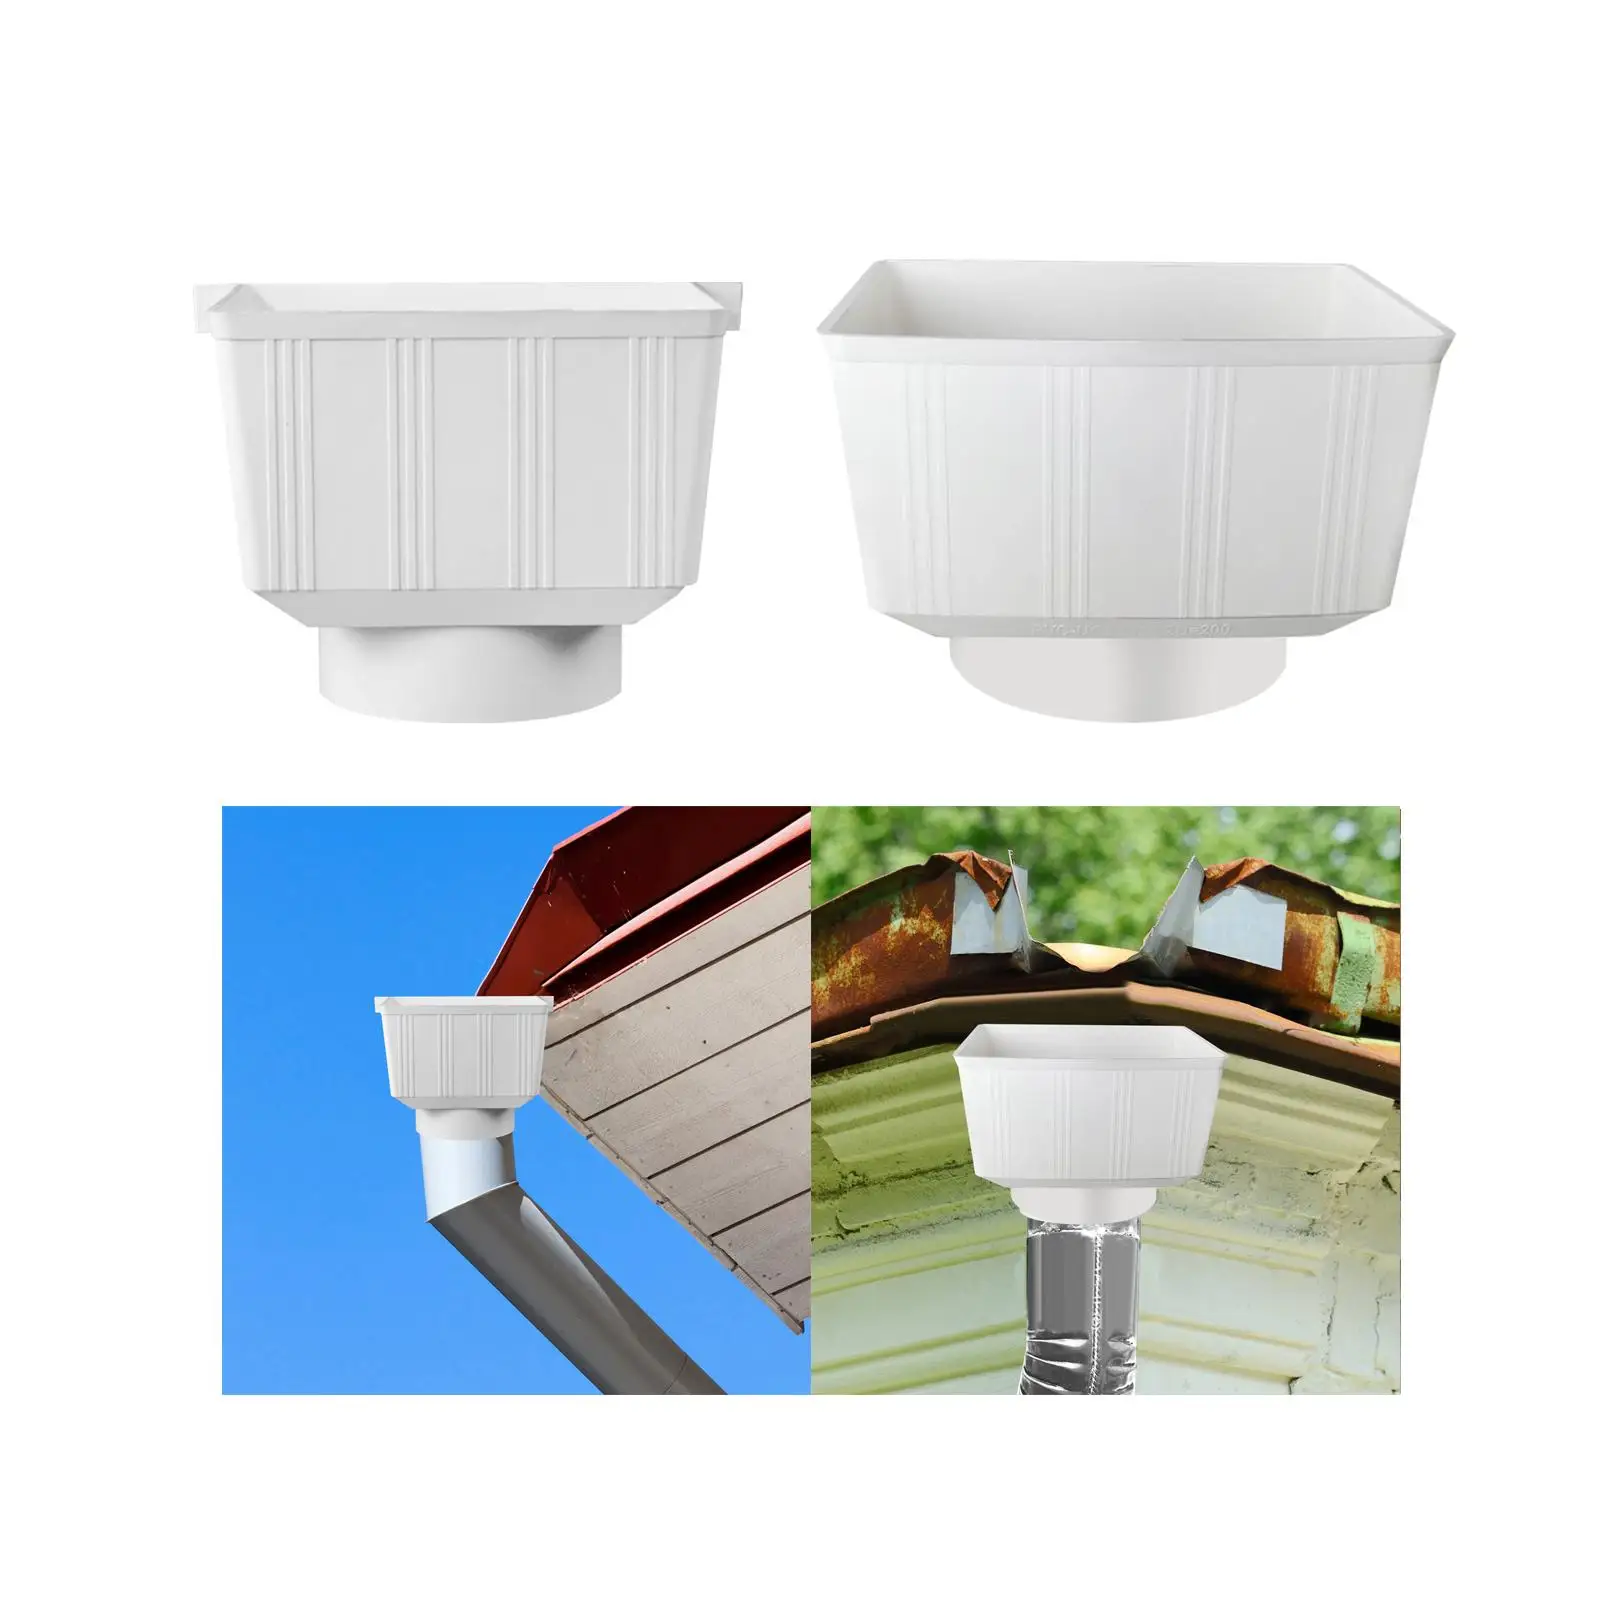 Rainwater Downspout Drainage Connector Rain Downspout Connector Rainwater Diverter Connector for Yard Outdoor Watering